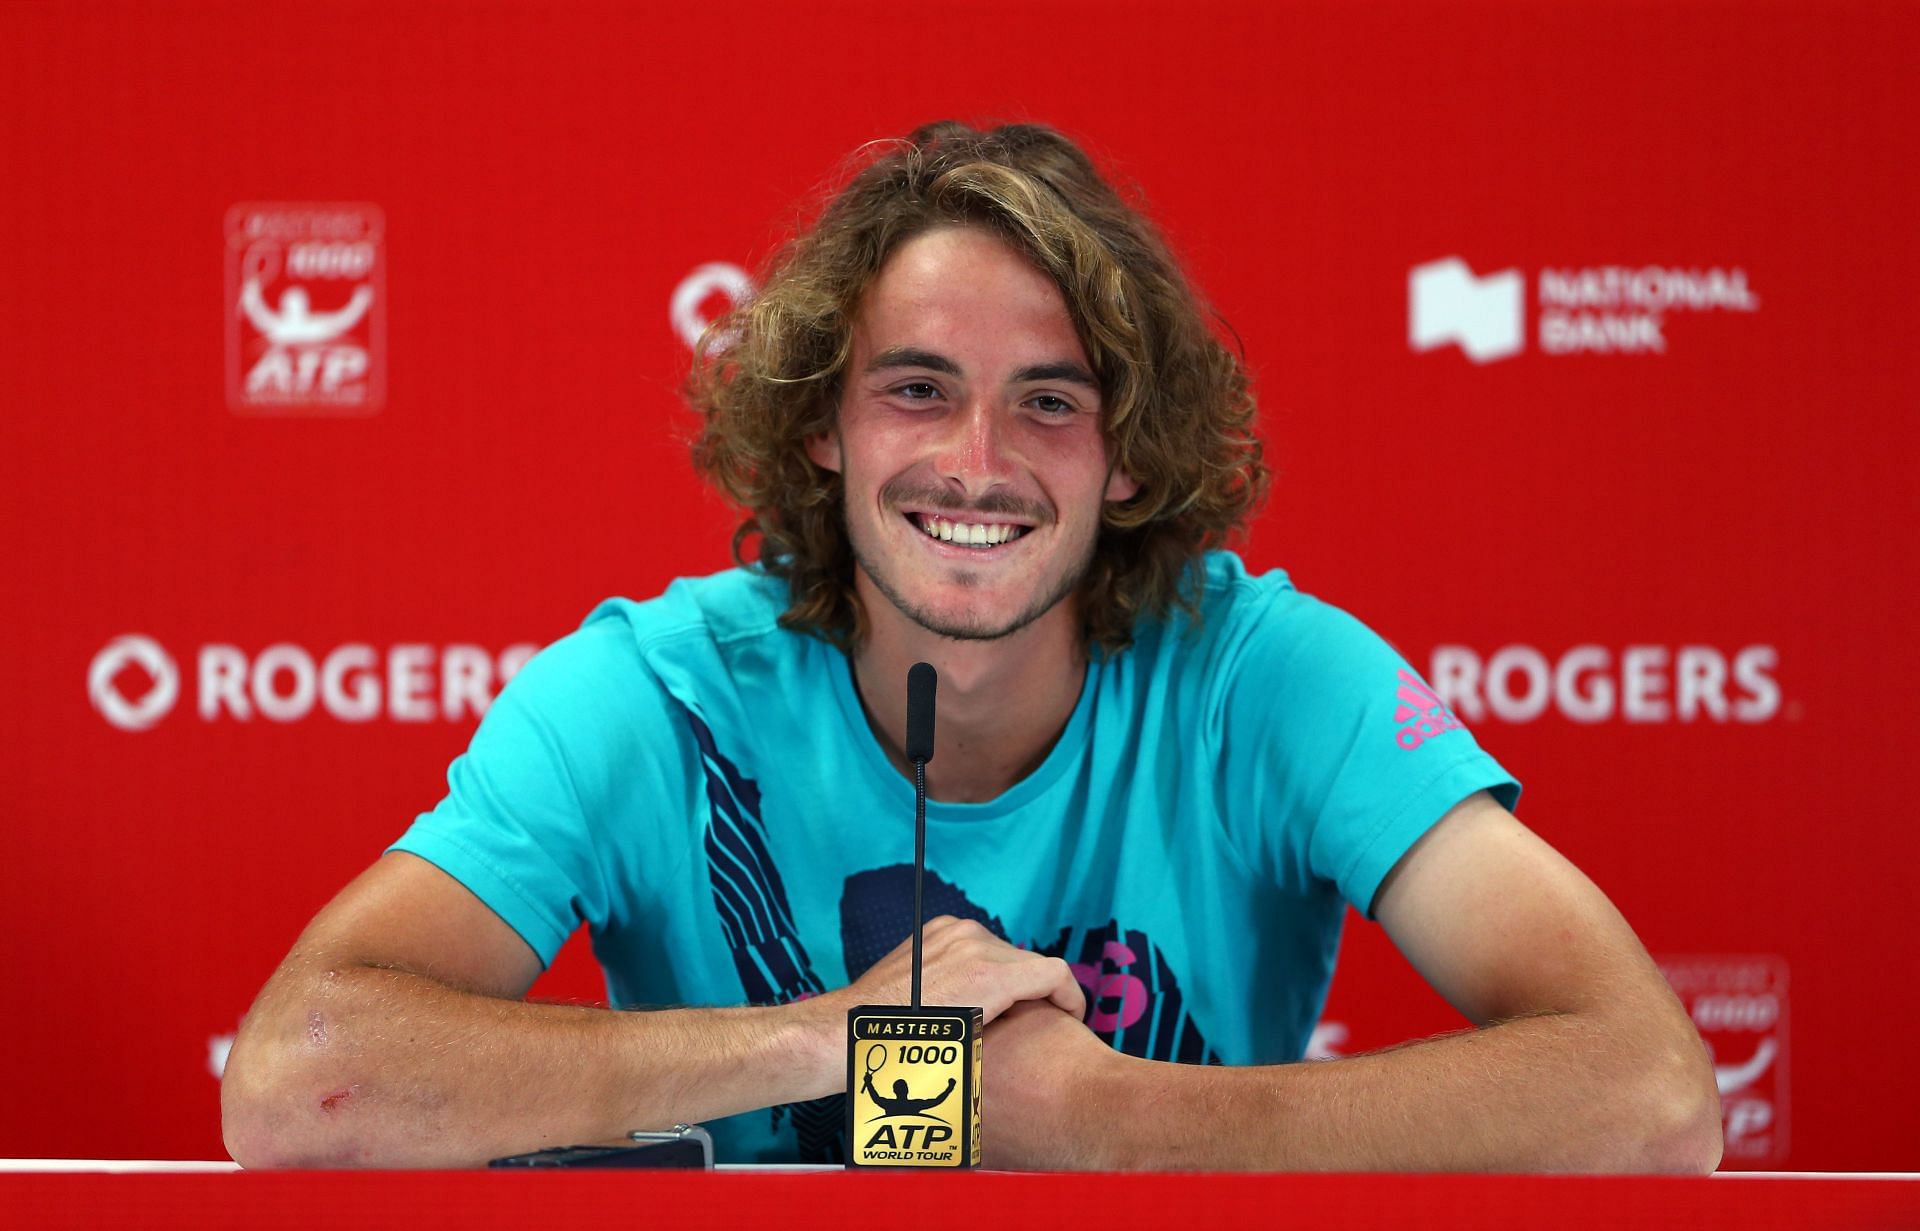 Stefanos Tsitsipas professed his innocence by saying he did not take toilet breaks unless necessary